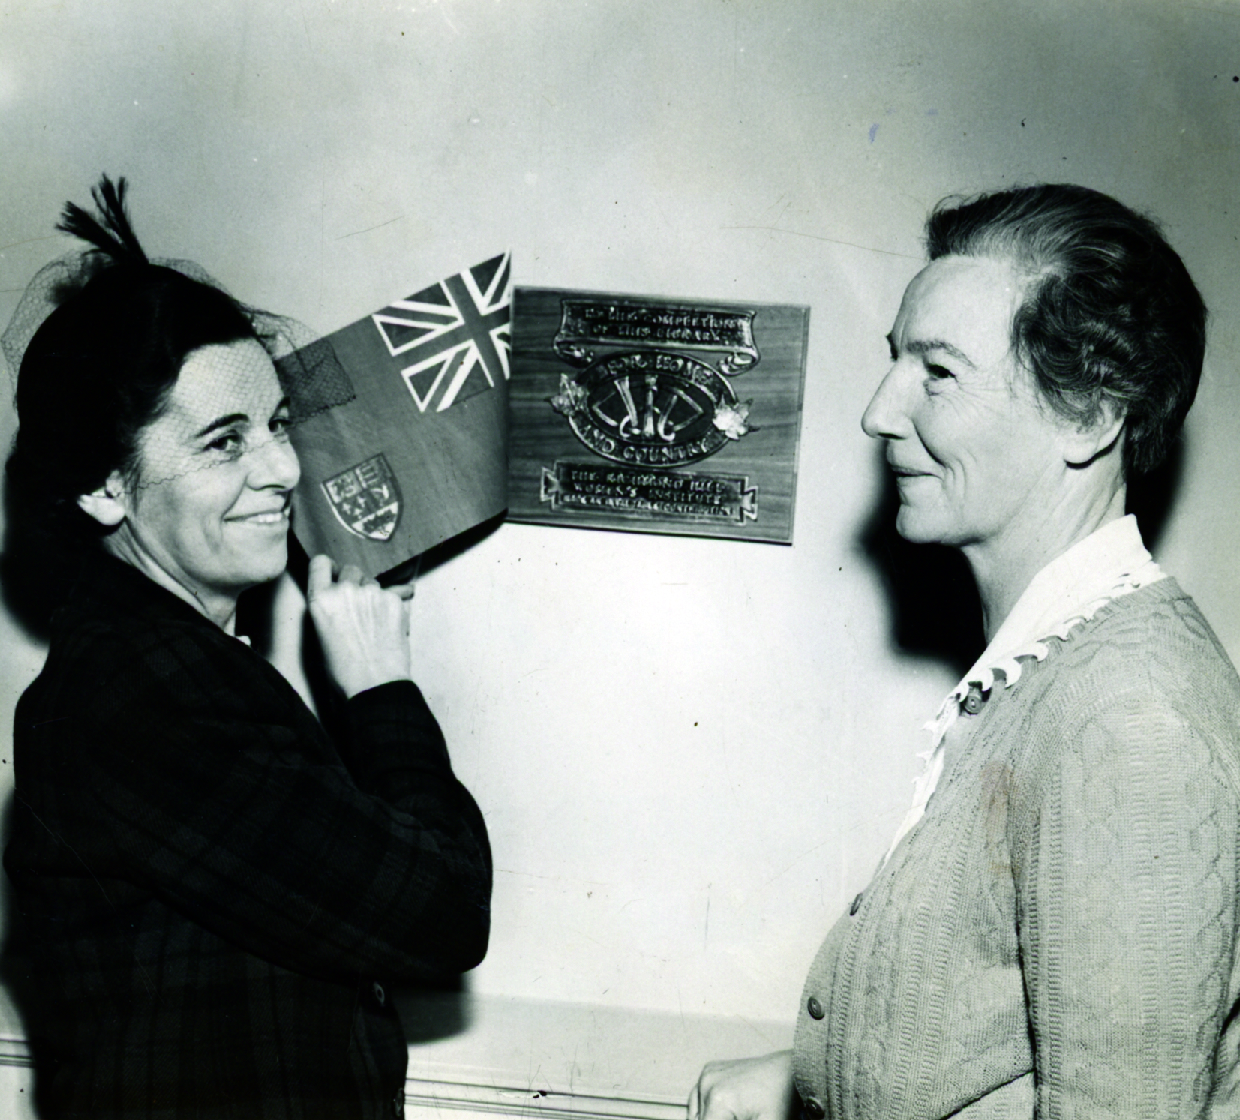 Mrs. H. H. MacKay unveiling the Women's Institute plaque with Edna Izzard representing the Library Board. The plaque commemorates the Institute's contribution to the library in 1949. (Richmond Hill Public Library, Tweedsmuir History Fonds)